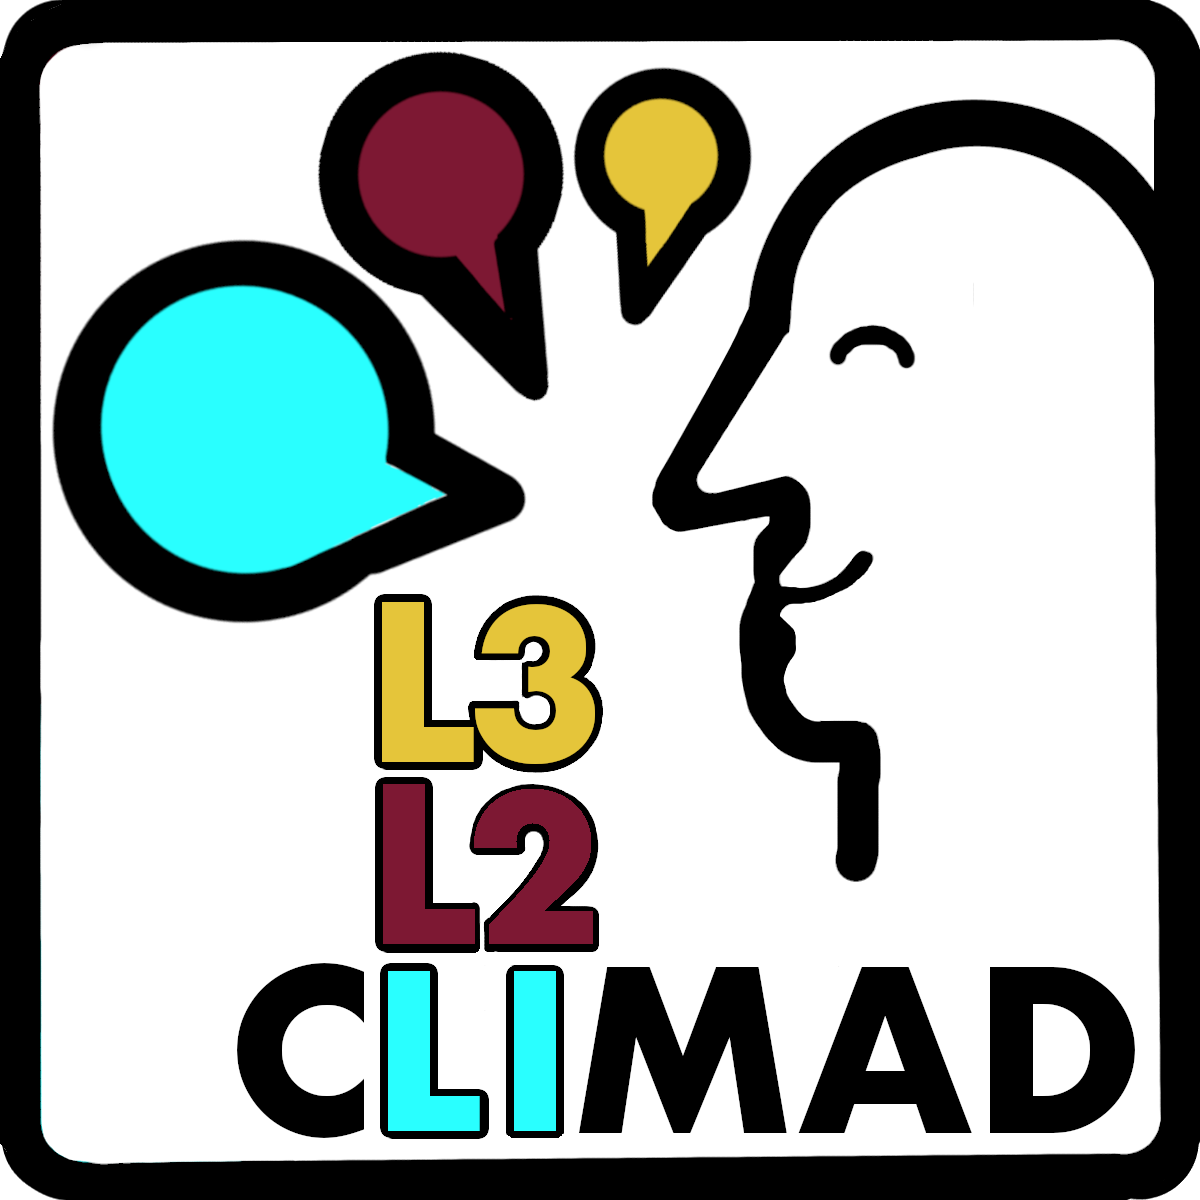 CLIMAD